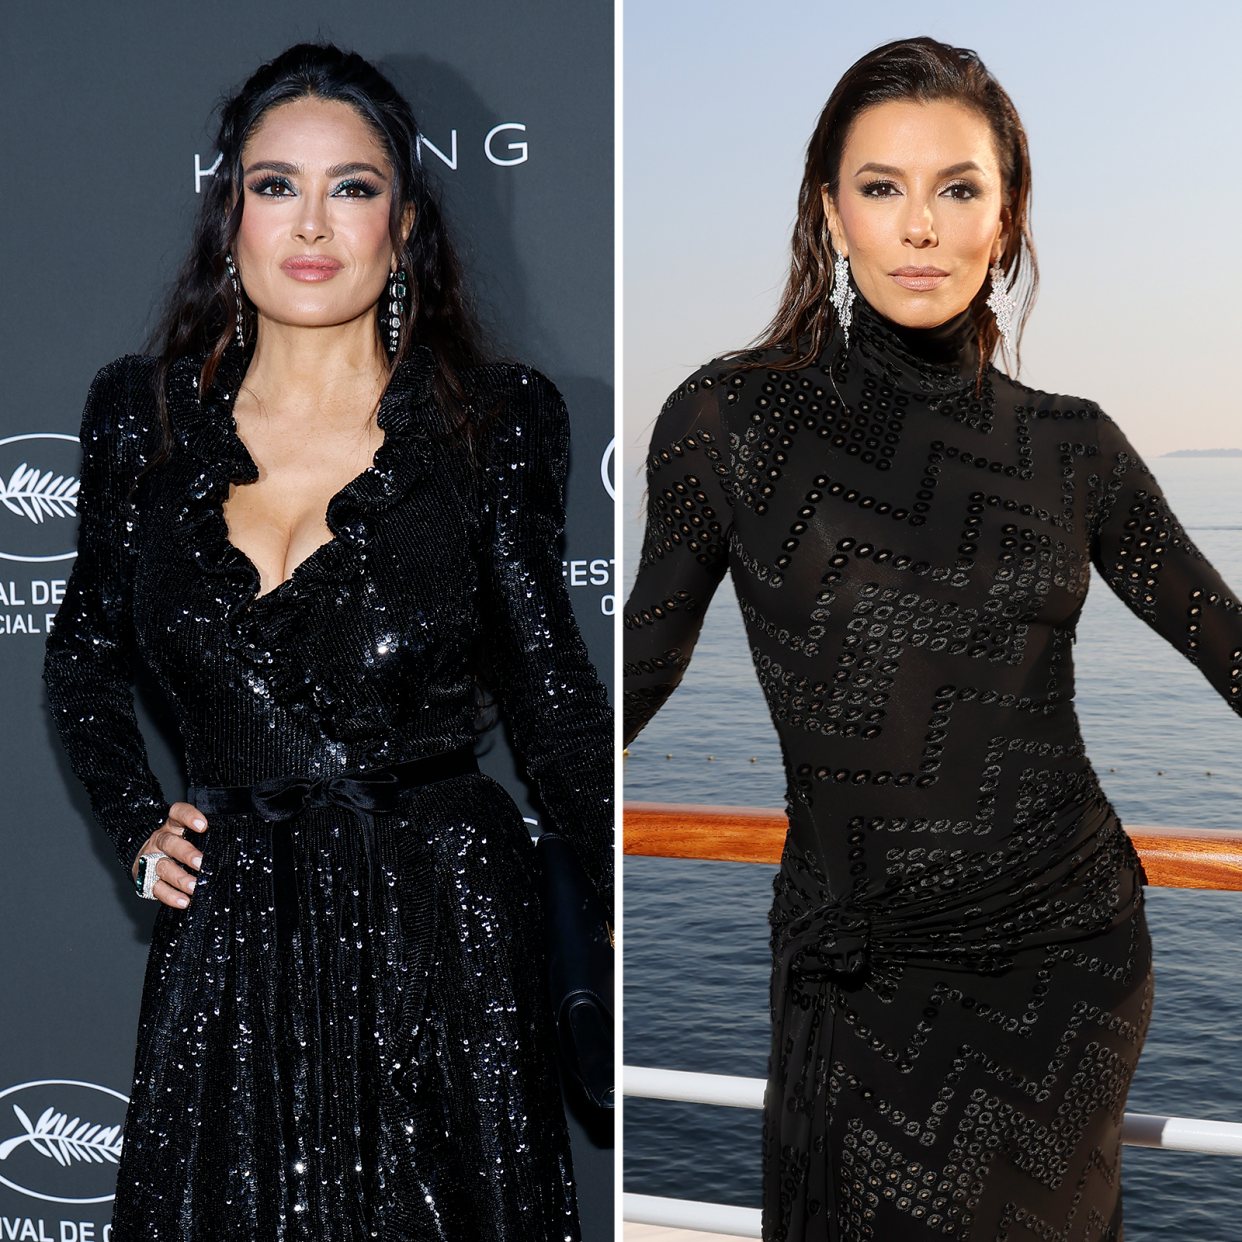 Salma Hayek y Eva Longoria. Victor Boyko/Getty Images for Air Mail/Warner Brothers Discovery; Mike Coppola/Getty Images 